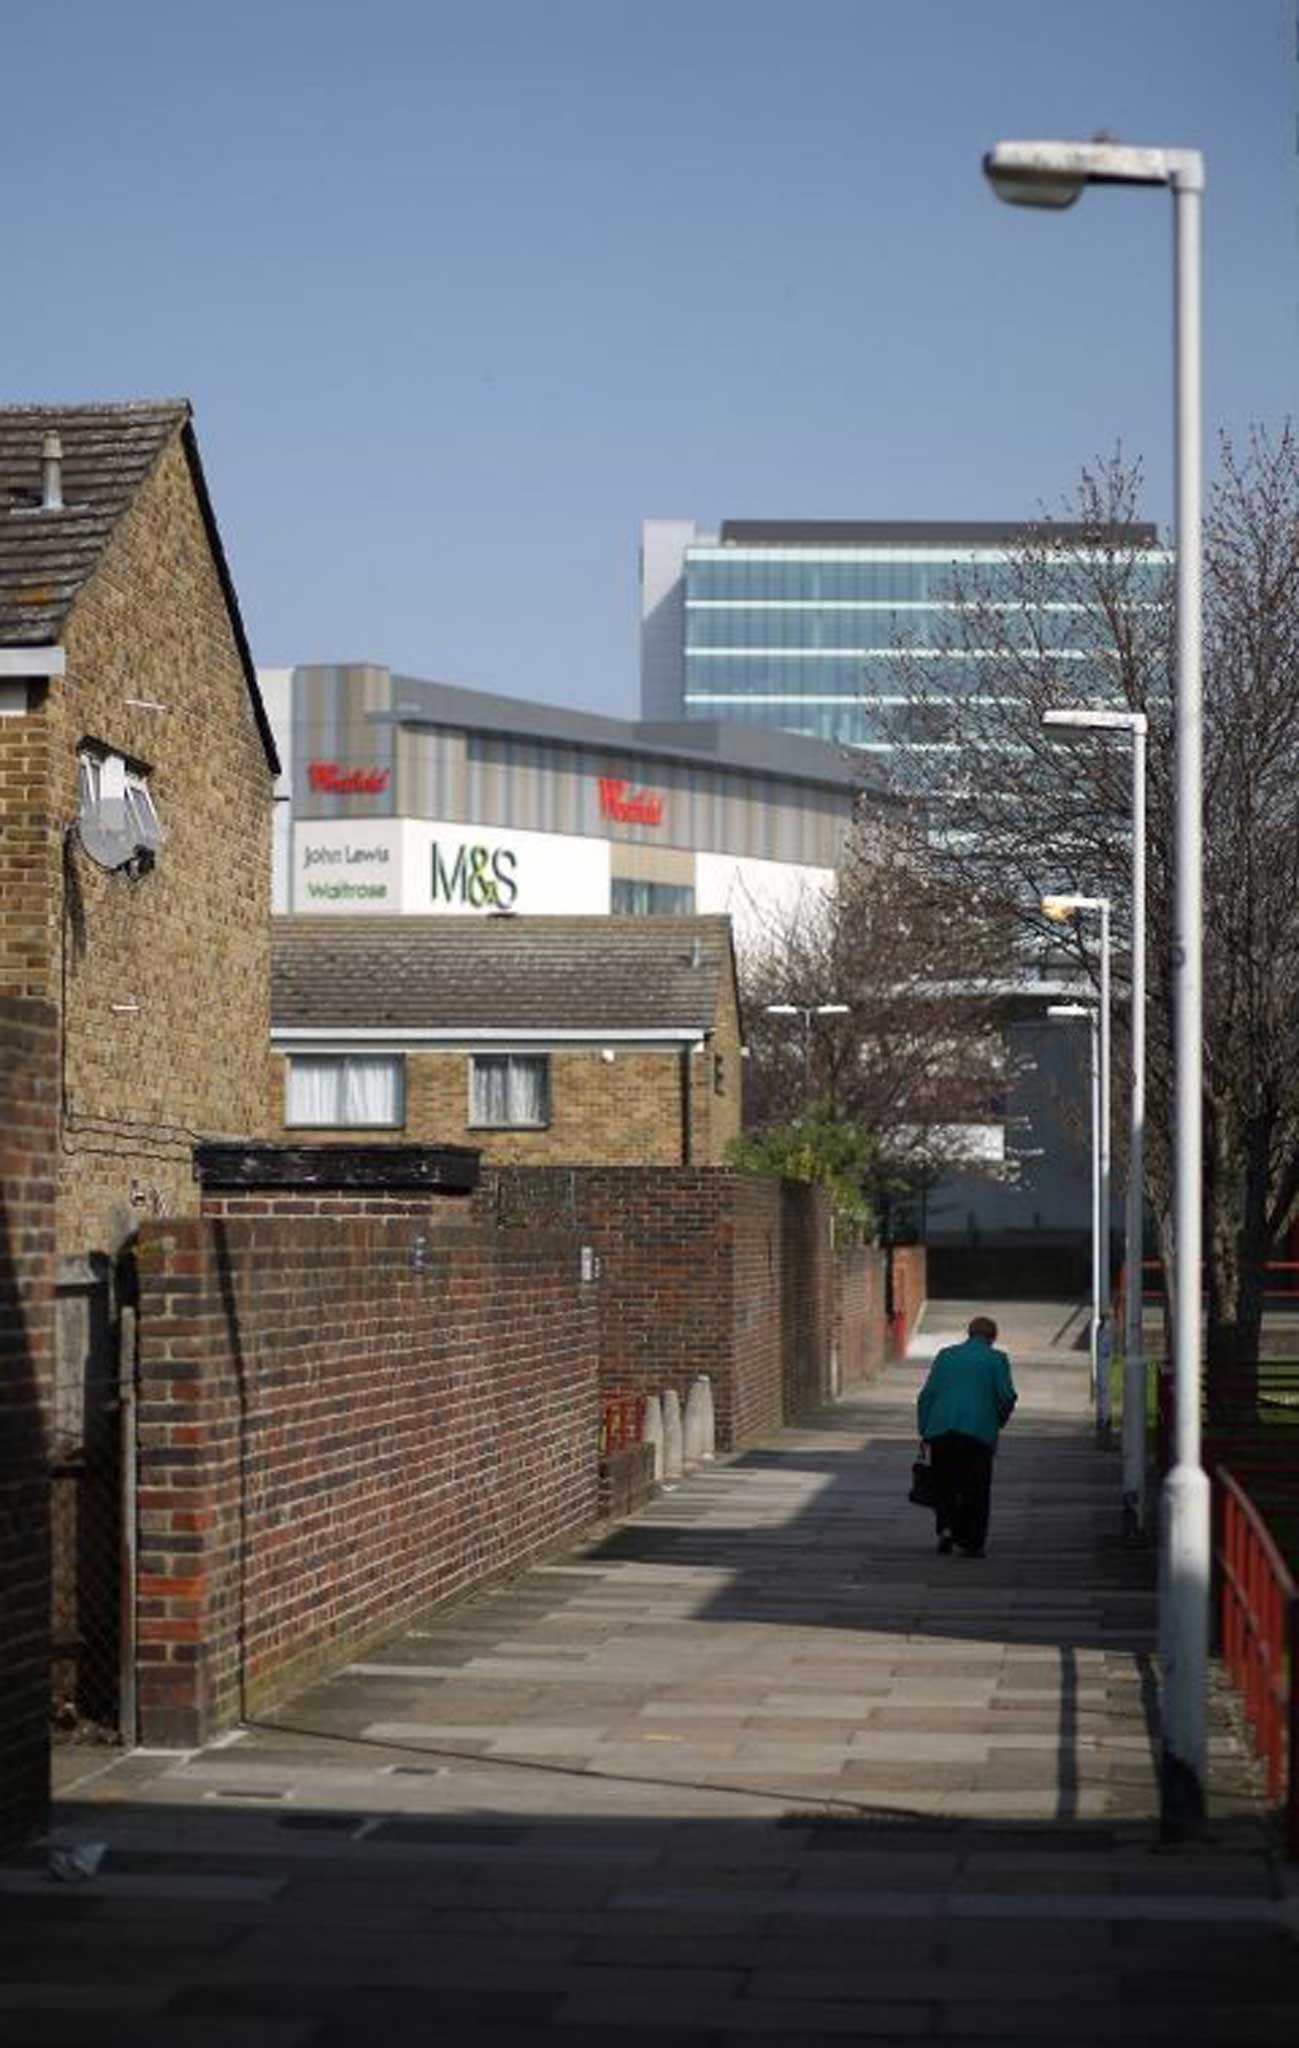 Towered over by the Westfield Stratford shopping mall, Newham is a repossession danger zone